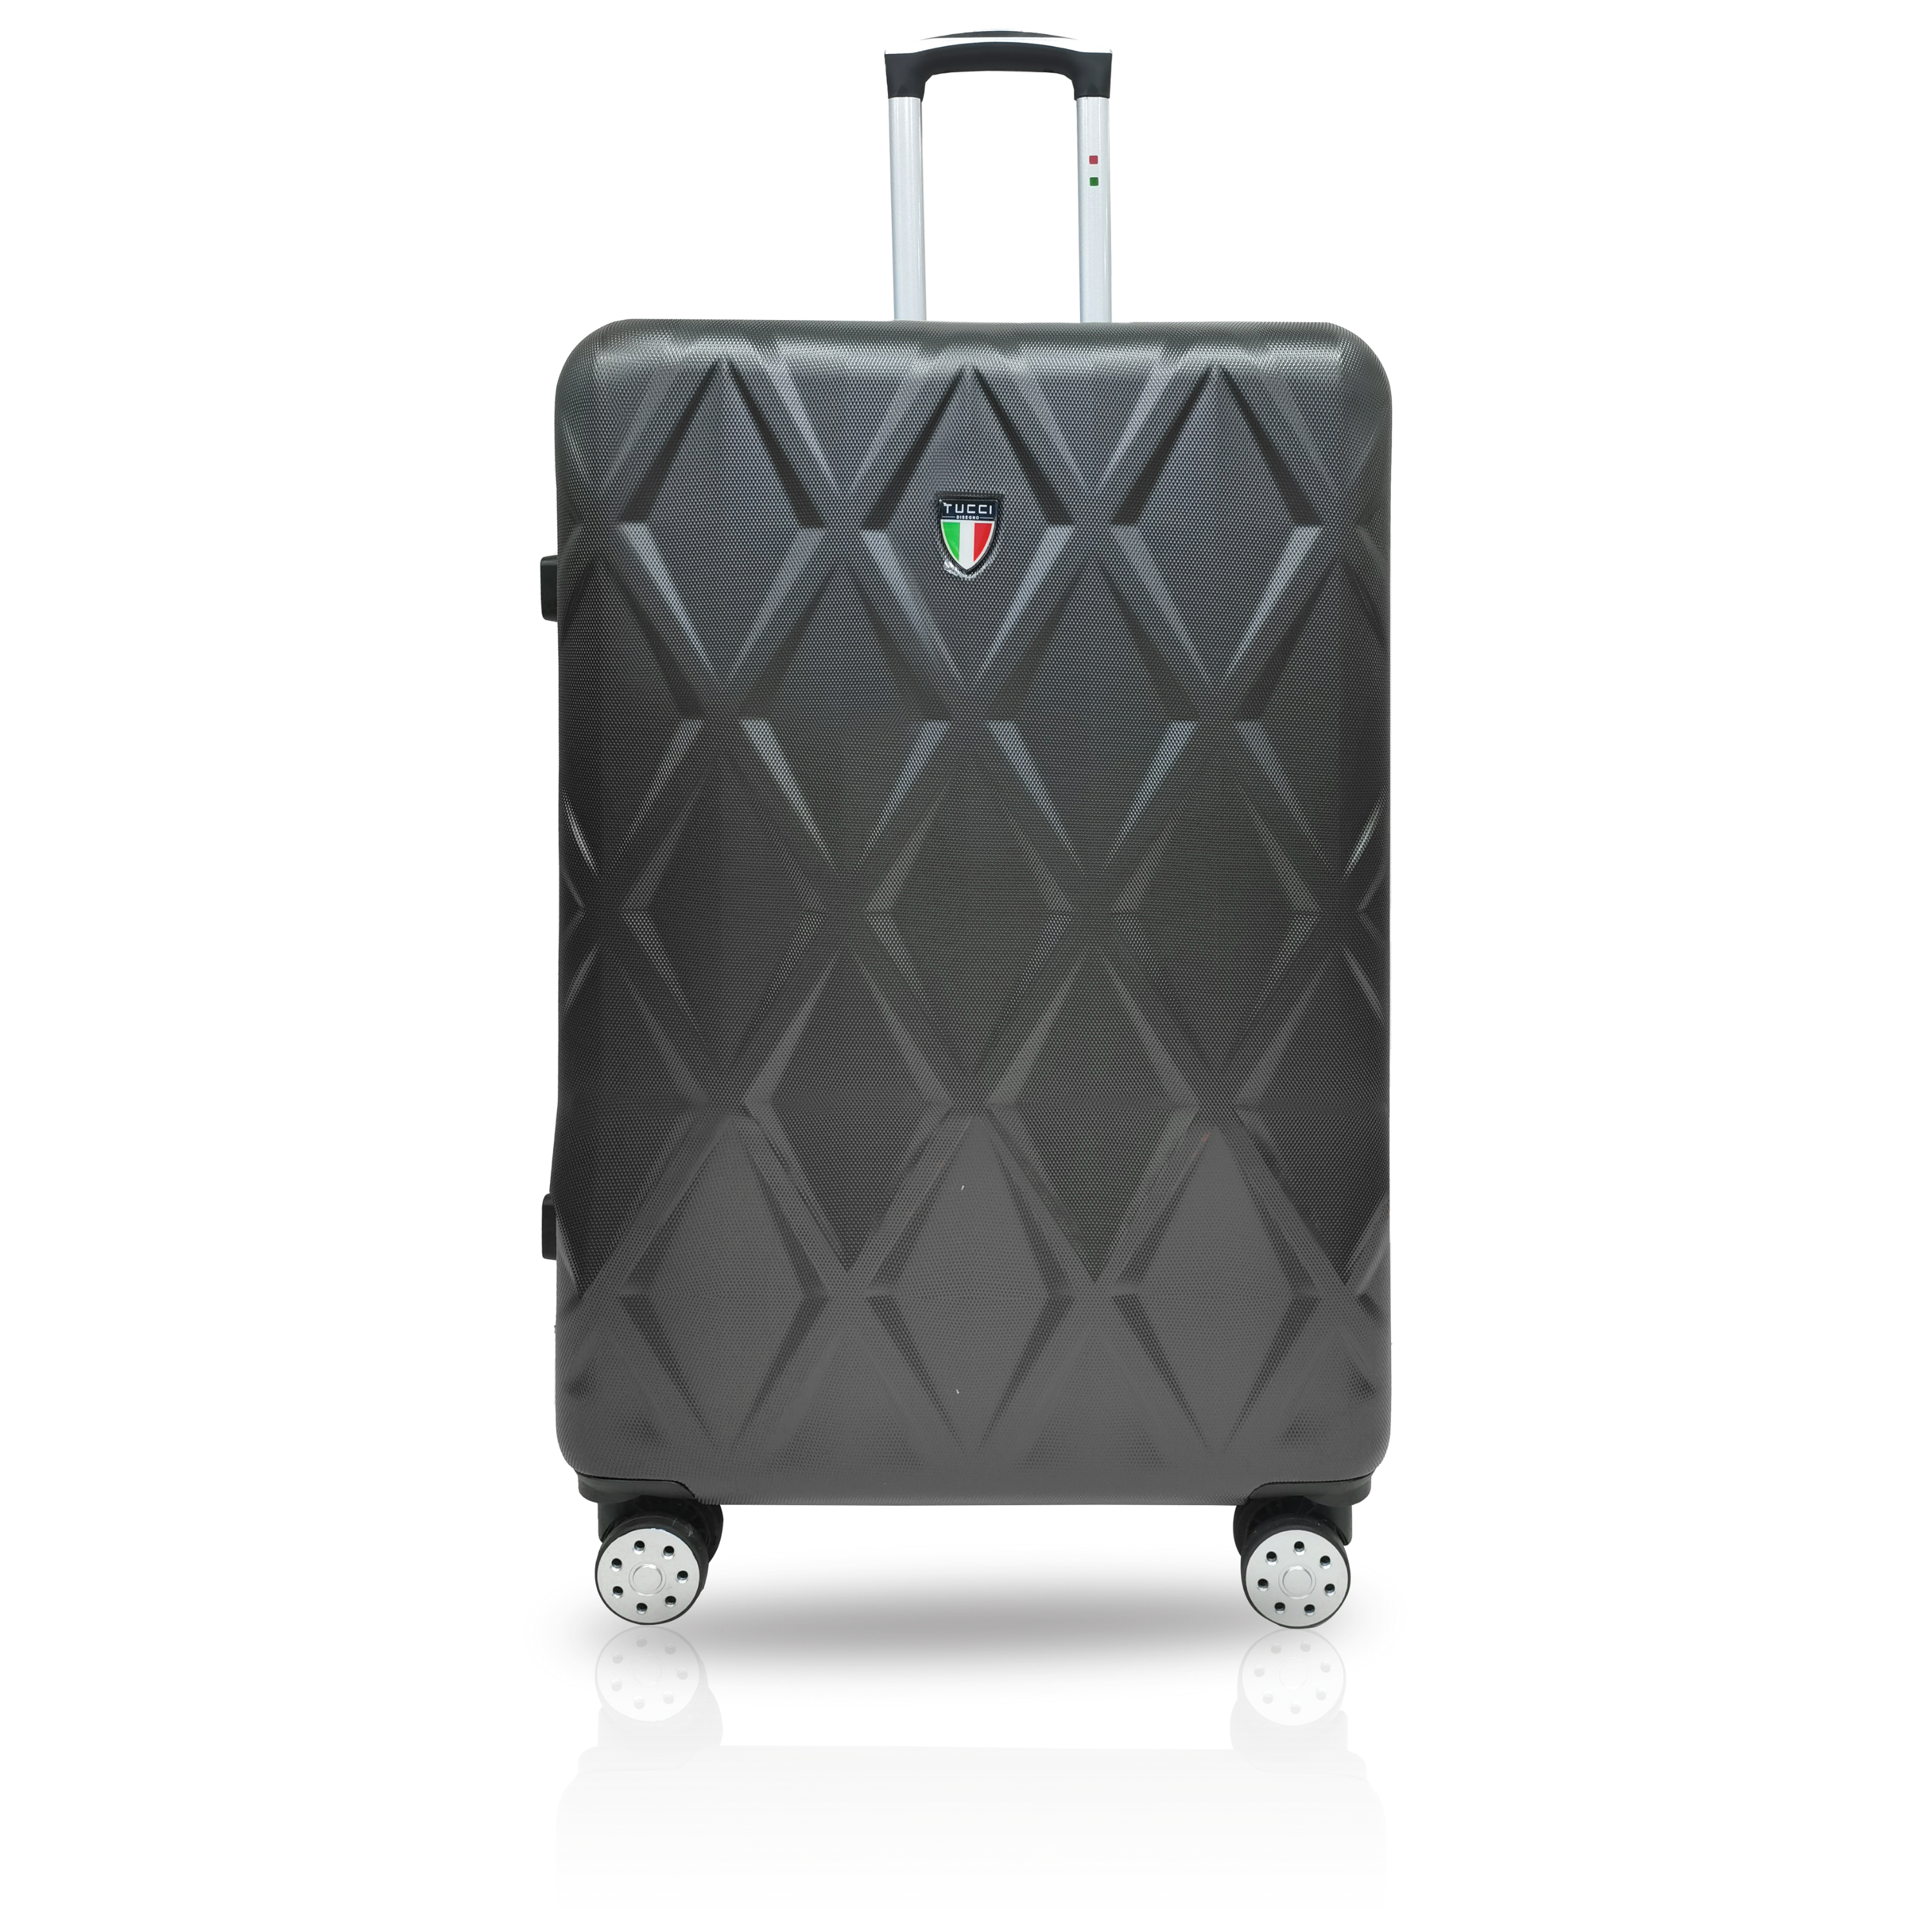 TUCCI ALVEARE ABS 28" Large Travel Luggage Suitcase